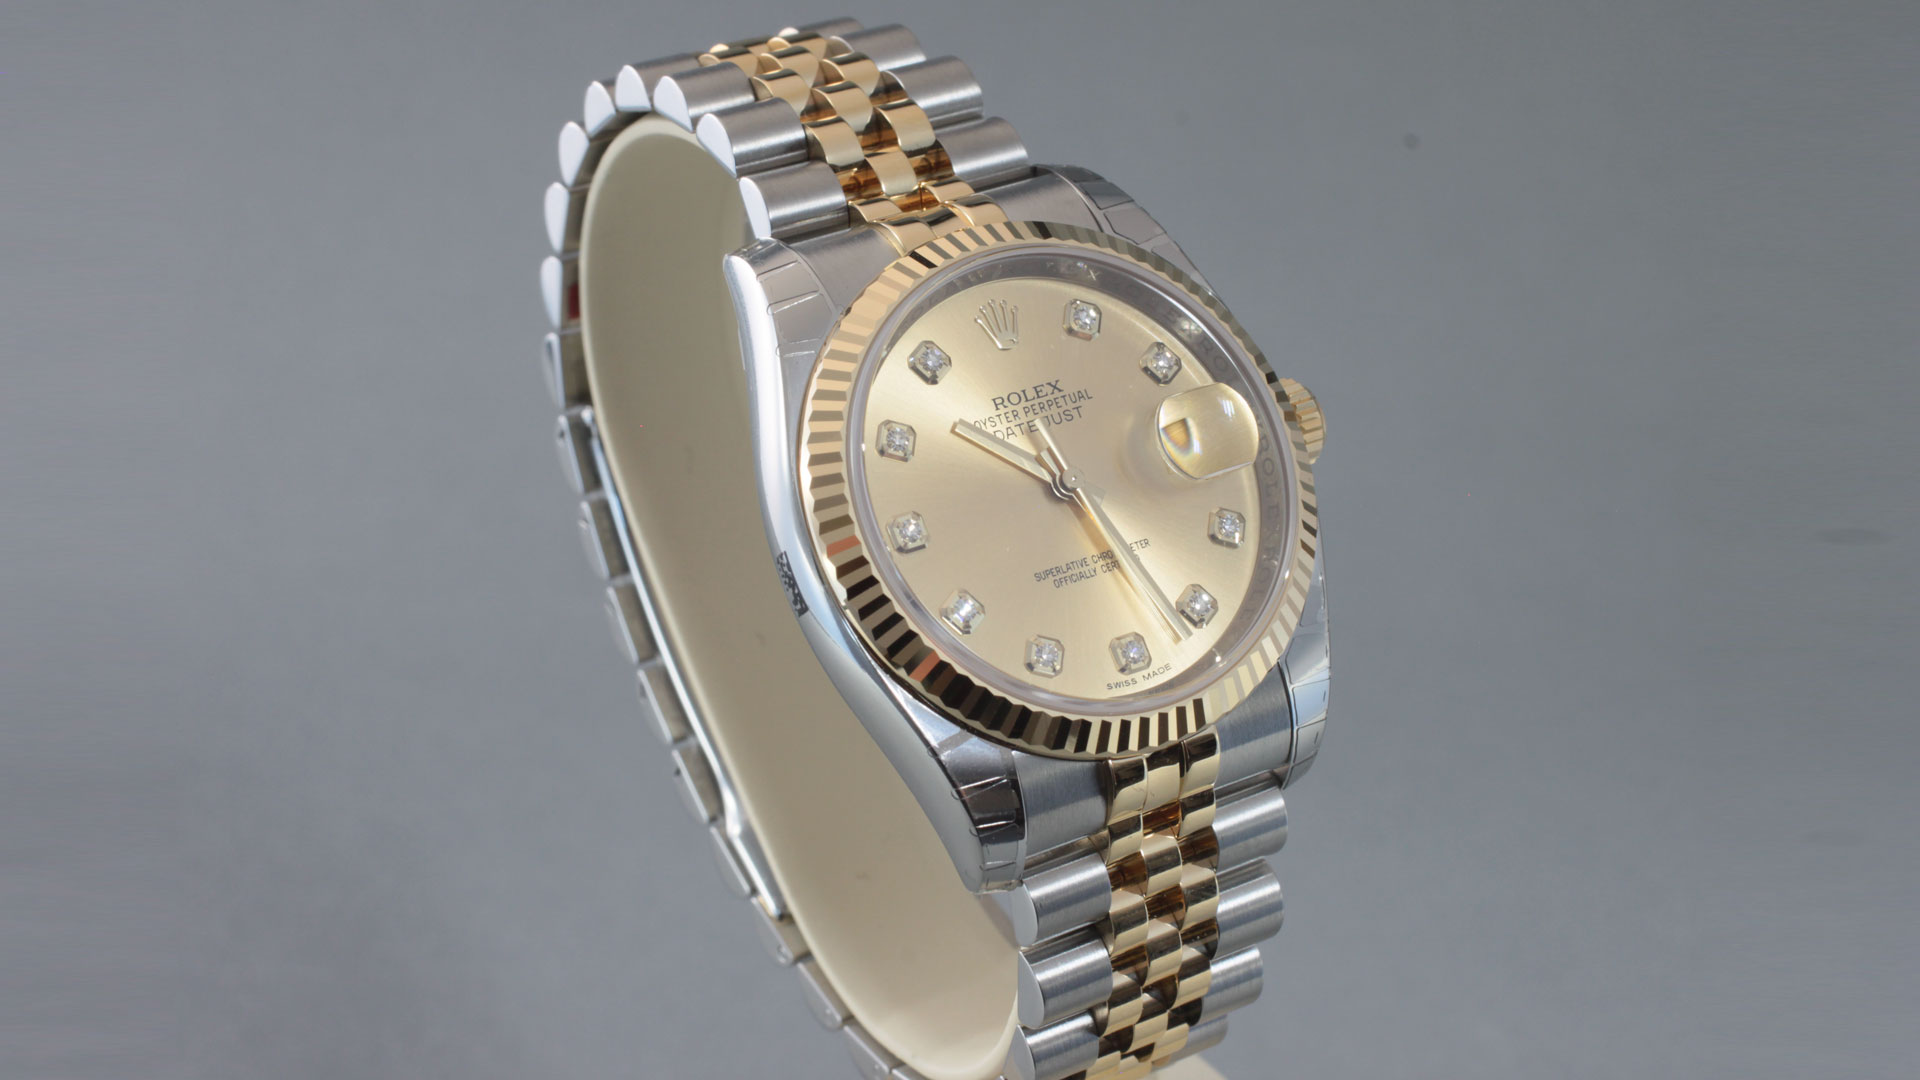 Rolex Datejust 36mm Champagne Diamond Dial 116233 – Complication Watches